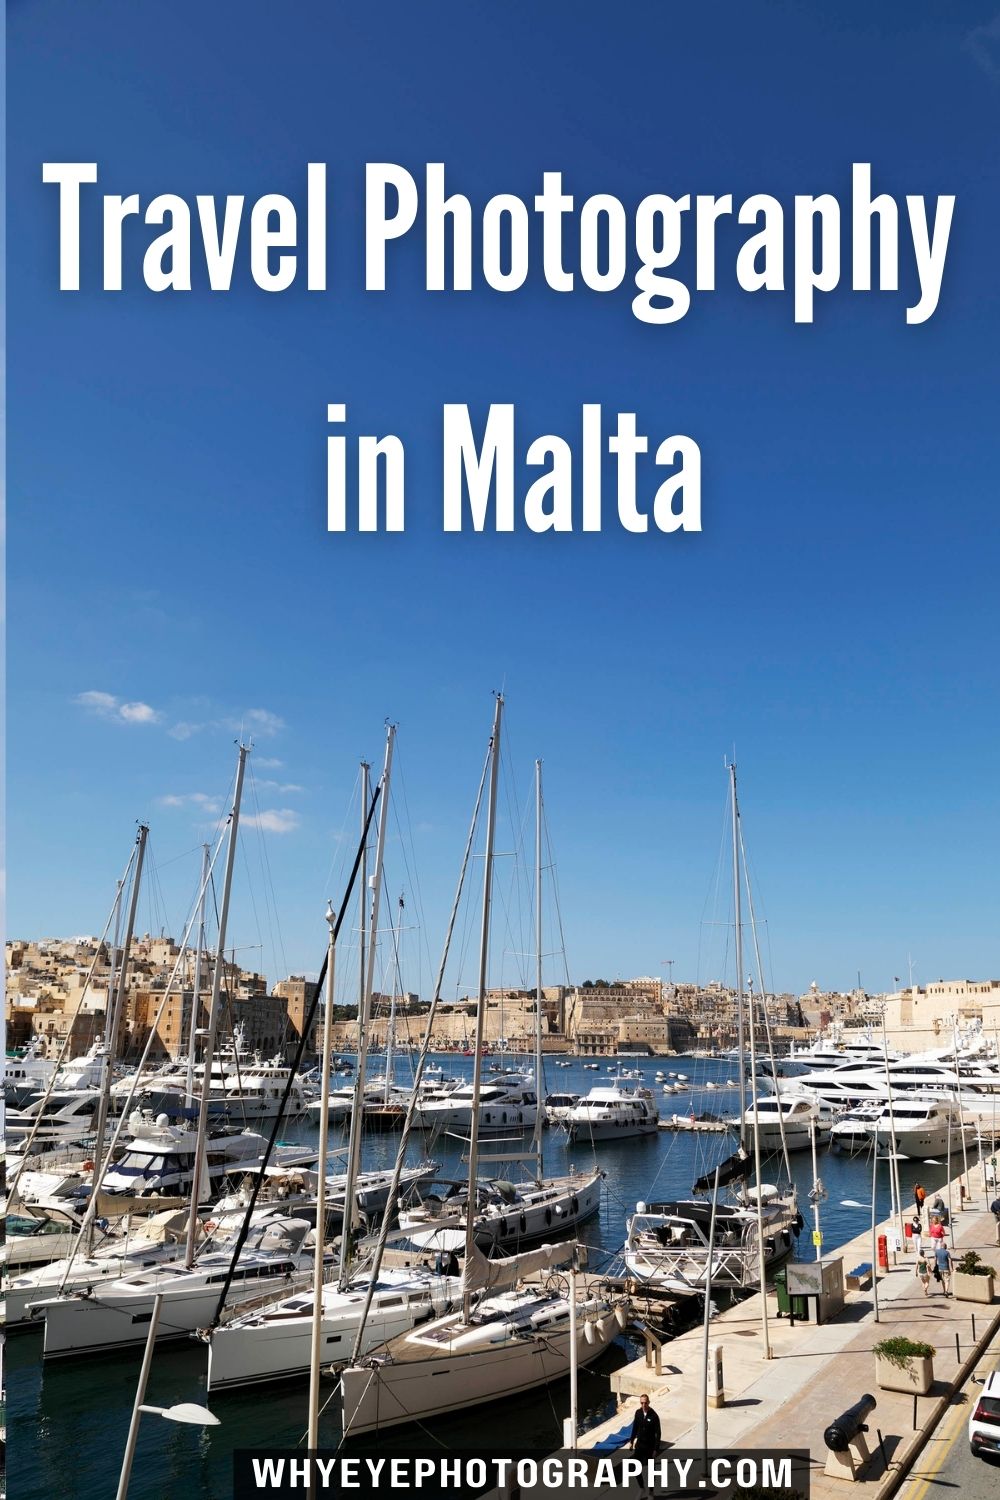 Pinterest pin for the blog post about travel photography in Malta on whyeyephotography.com